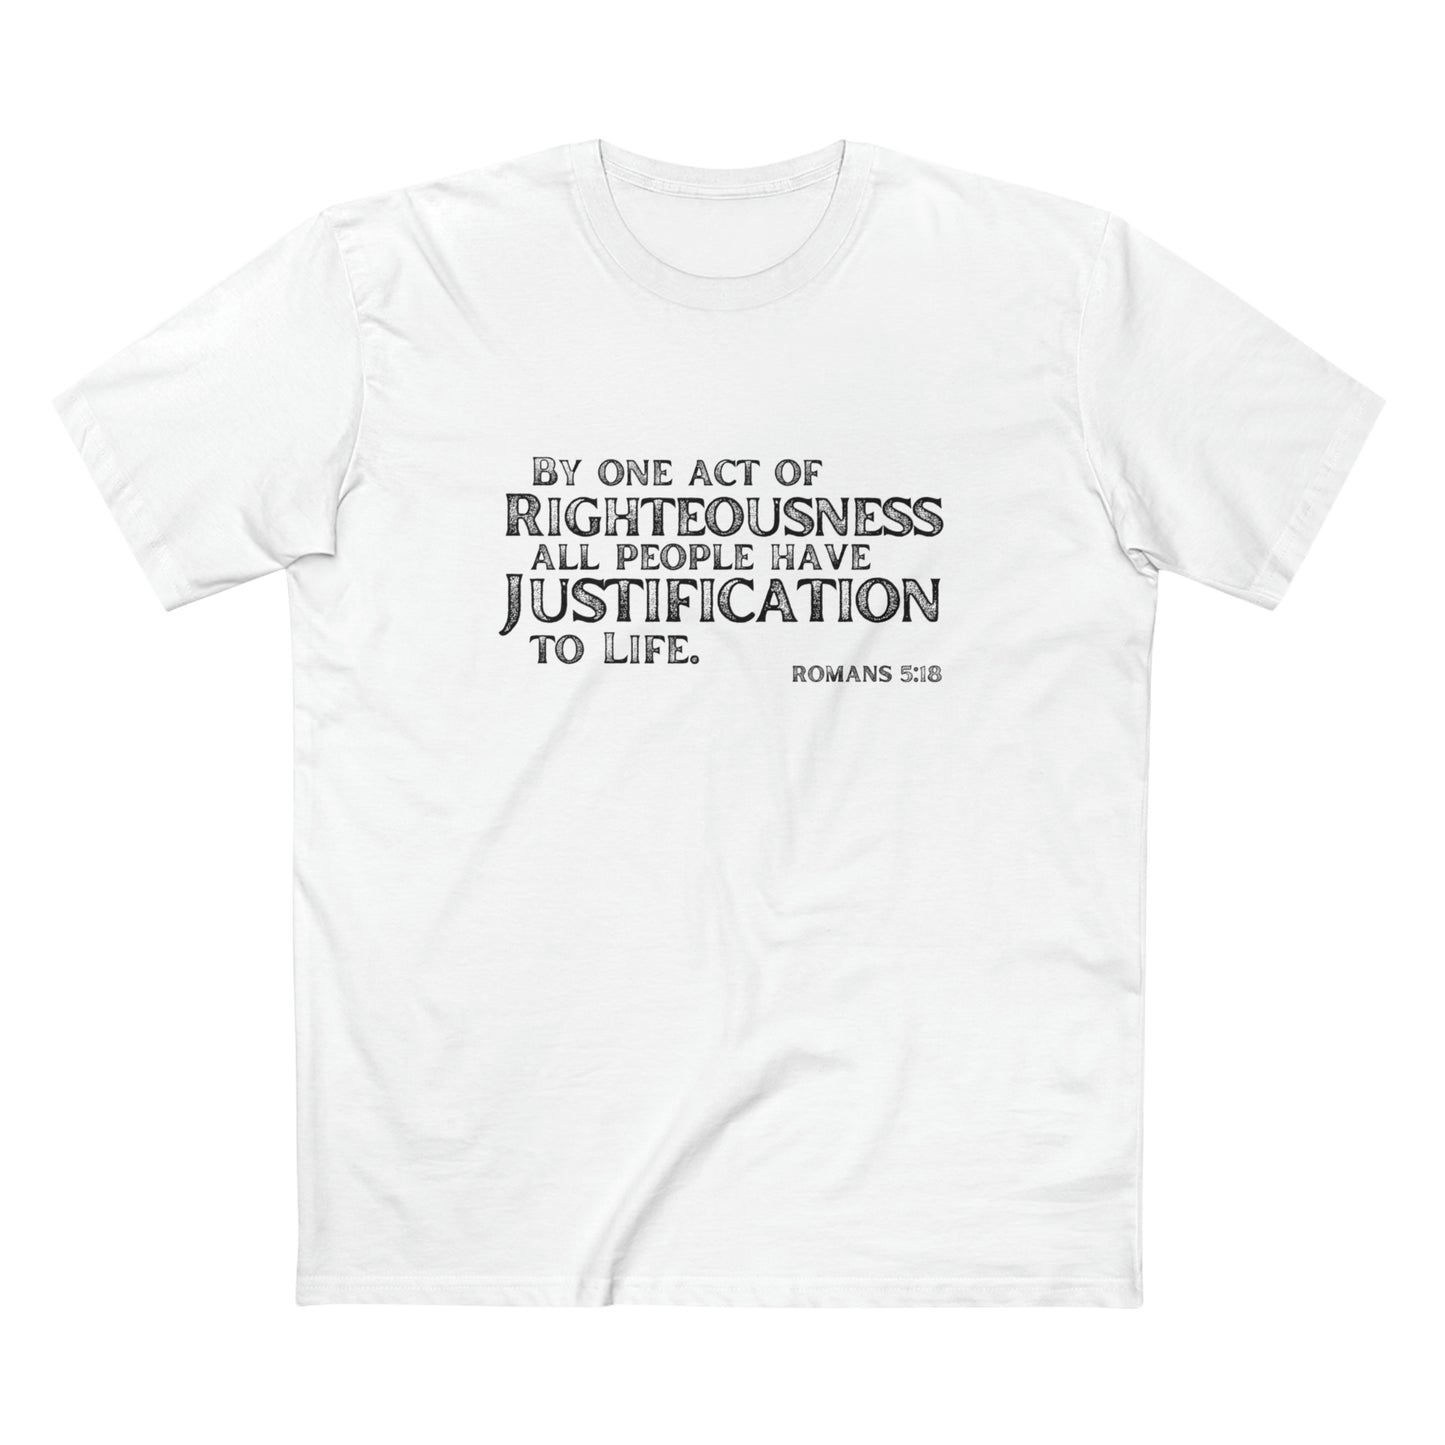 Romans 5:18 Justification, Christian T-shirt for Men and Women